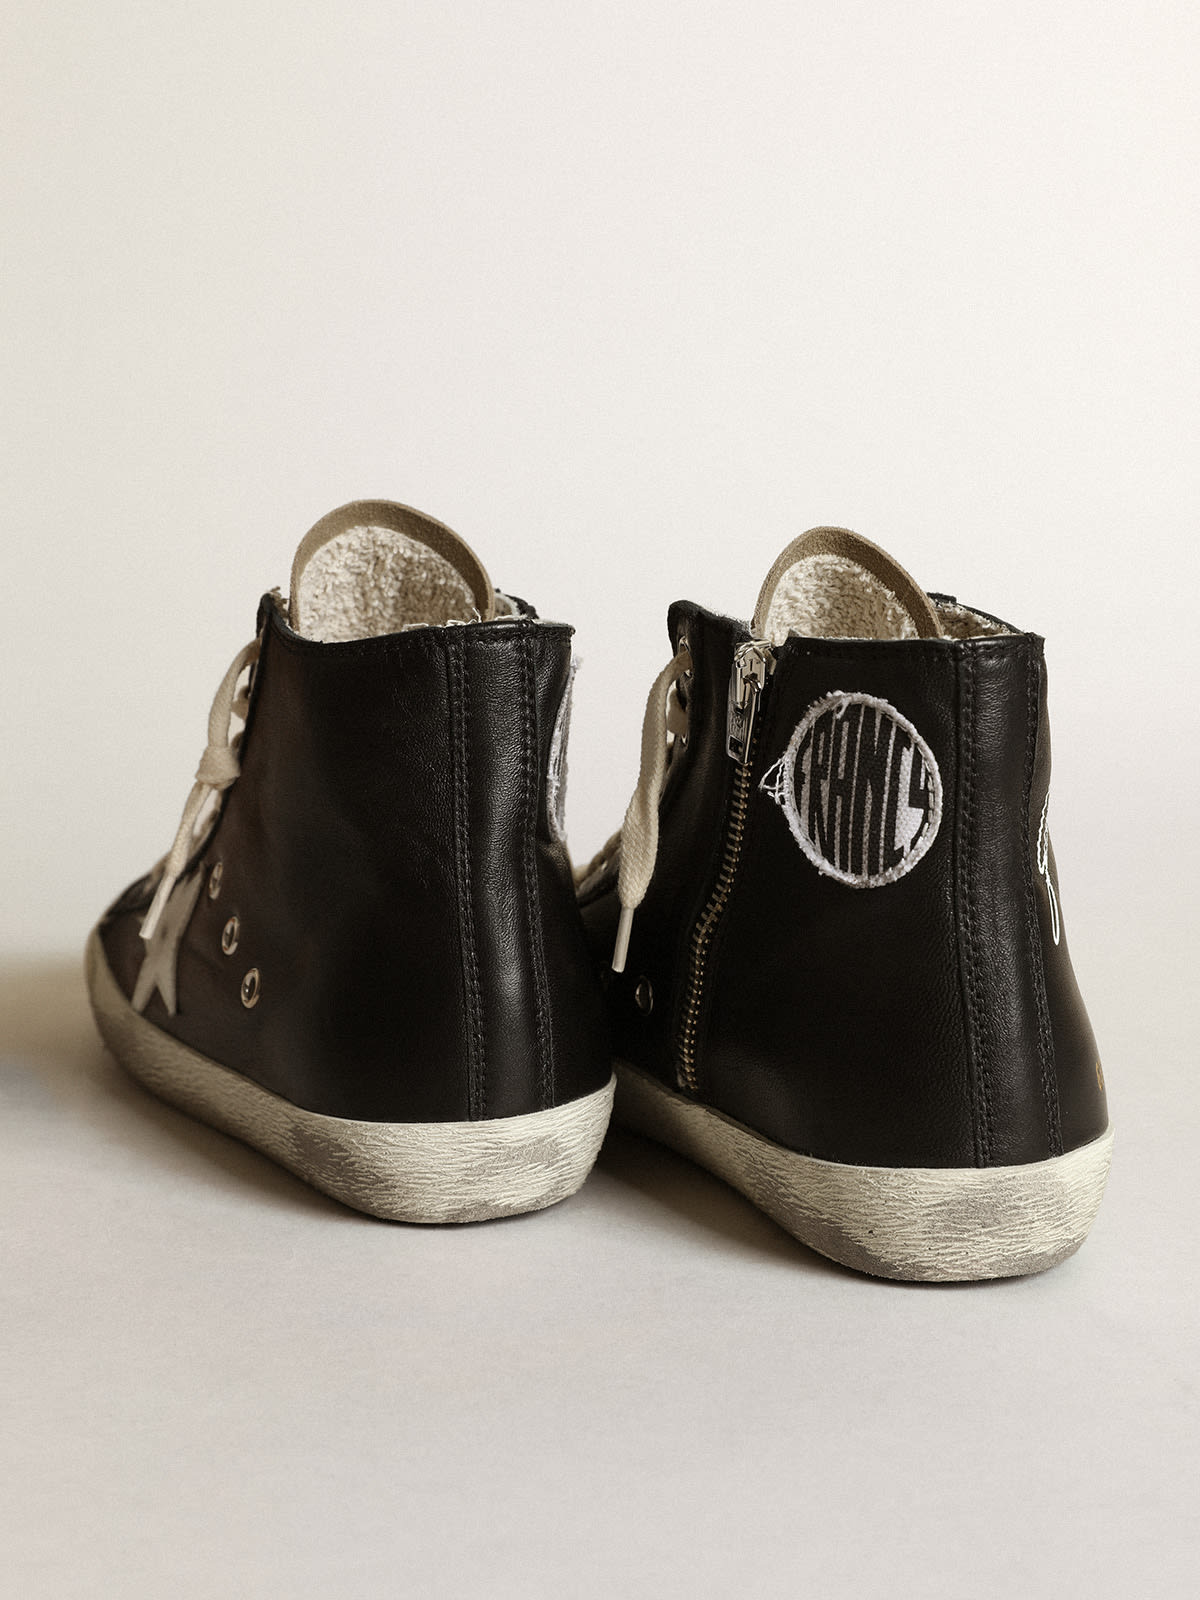 Golden Goose - Francy sneakers in black nappa leather with white leather star and dove-gray suede tongue in 